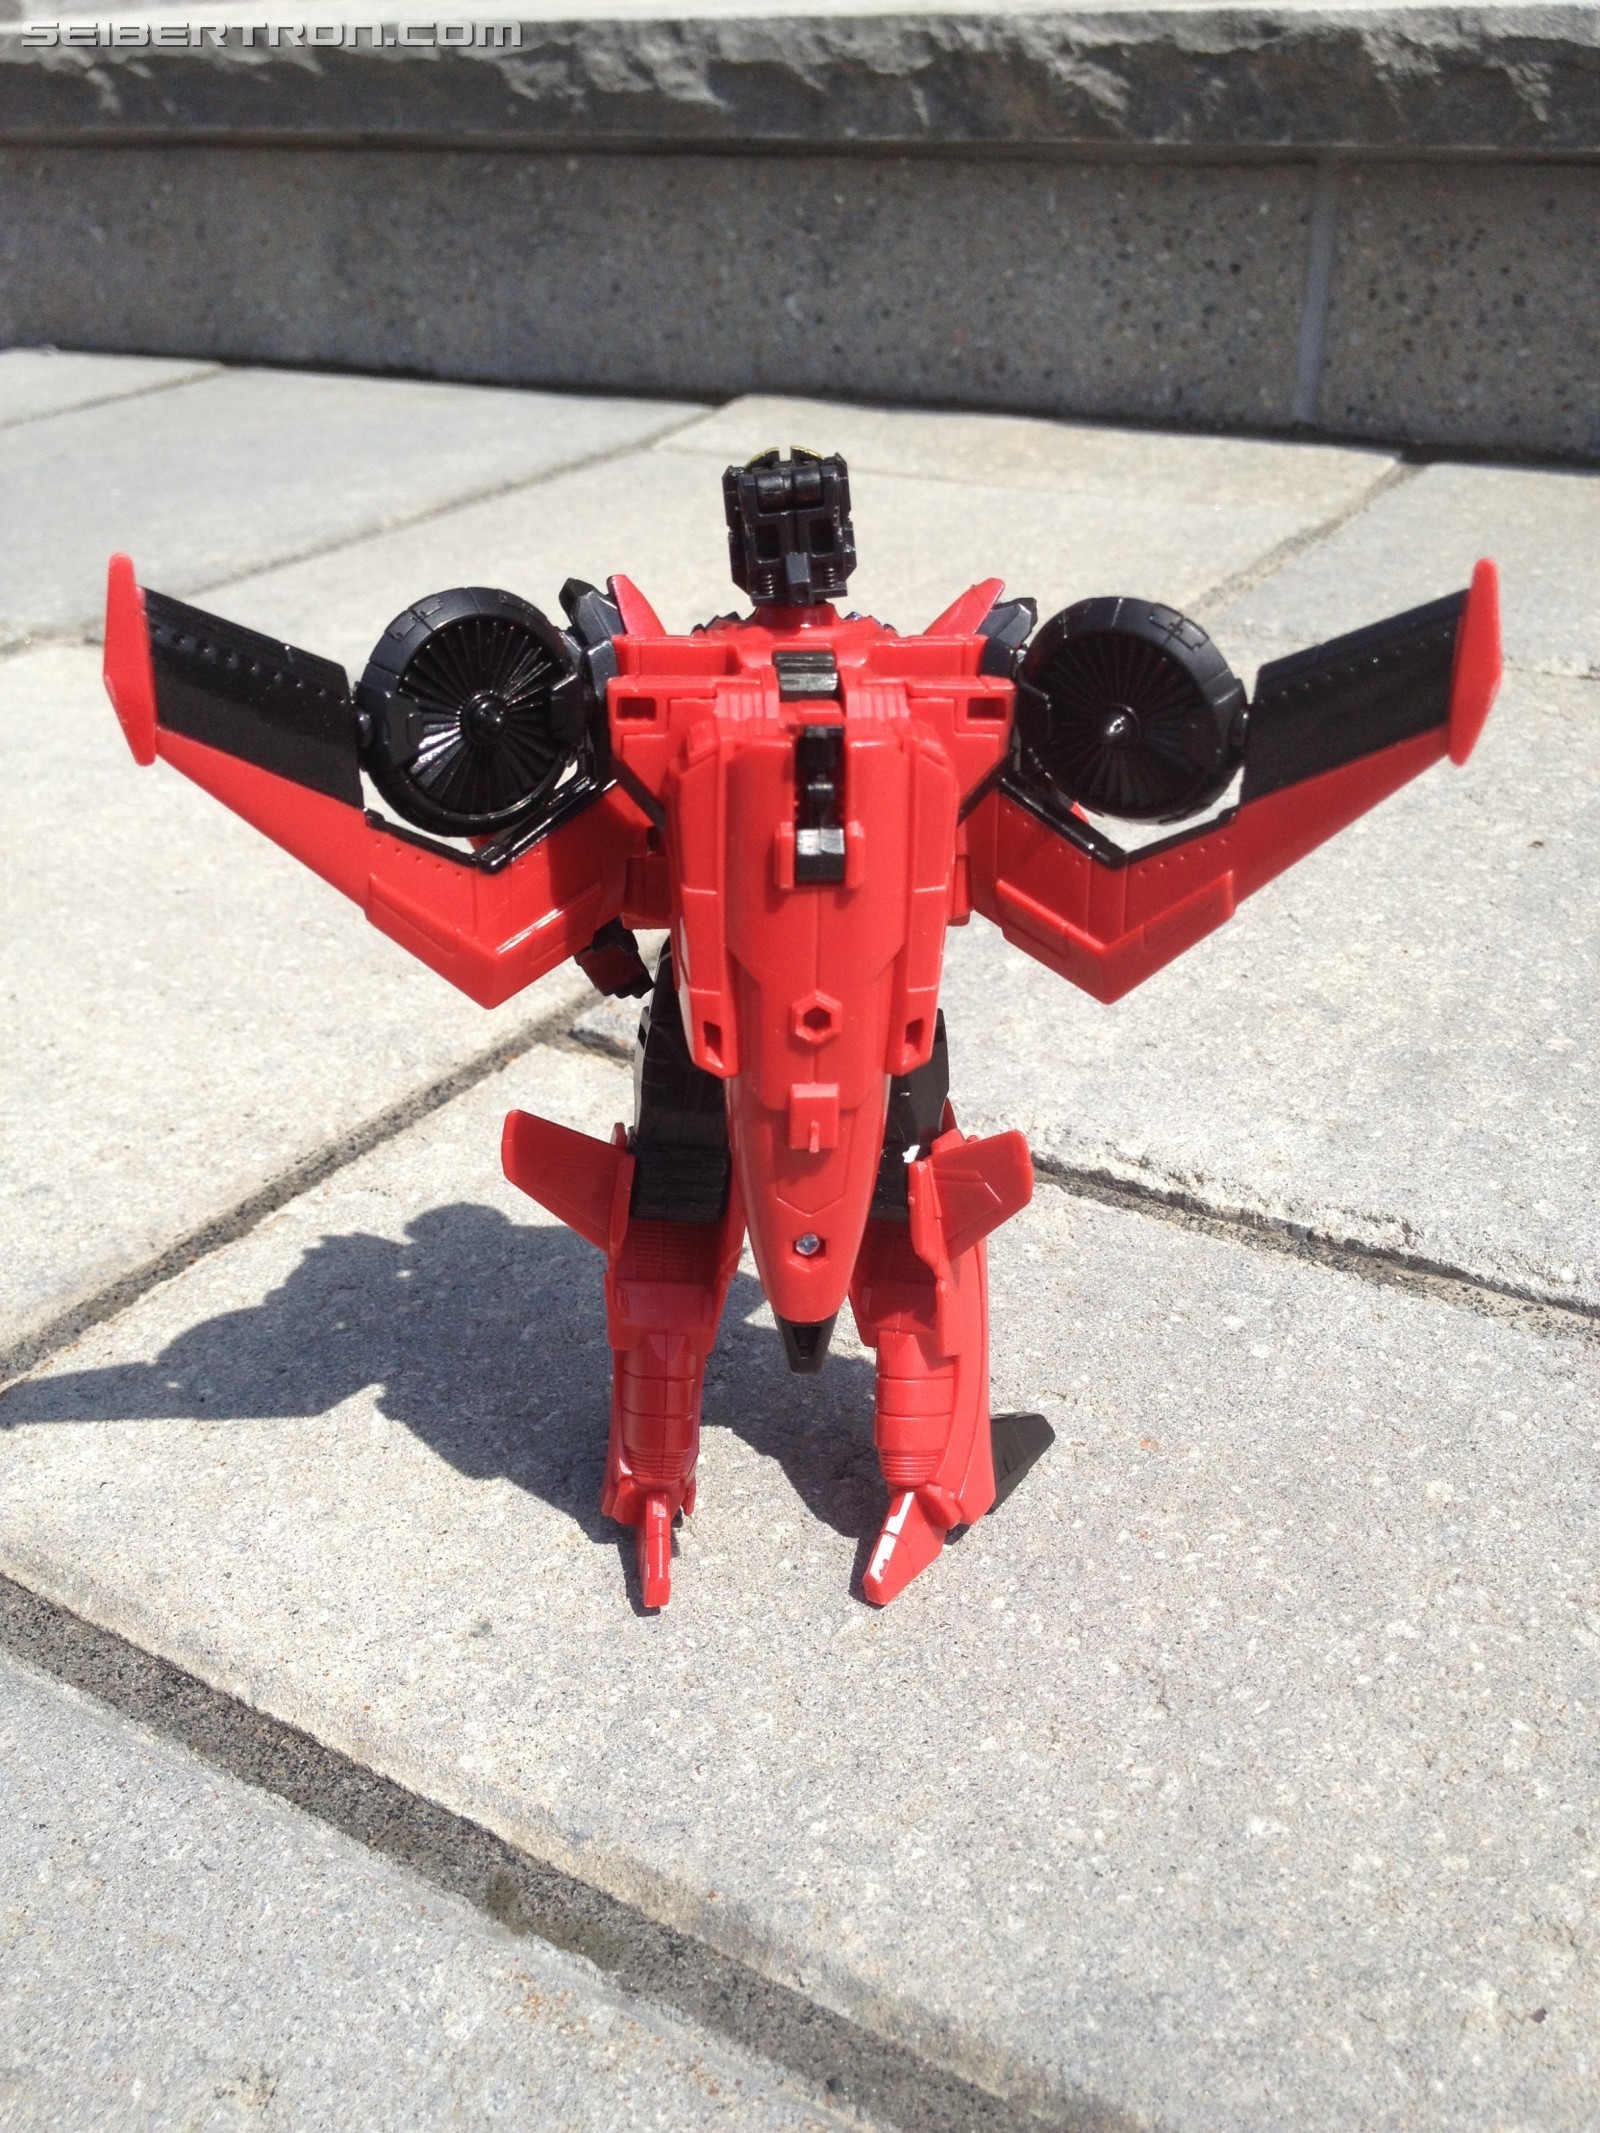 Transformers News: Pictorial Review of Transformers Titans Return Windblade